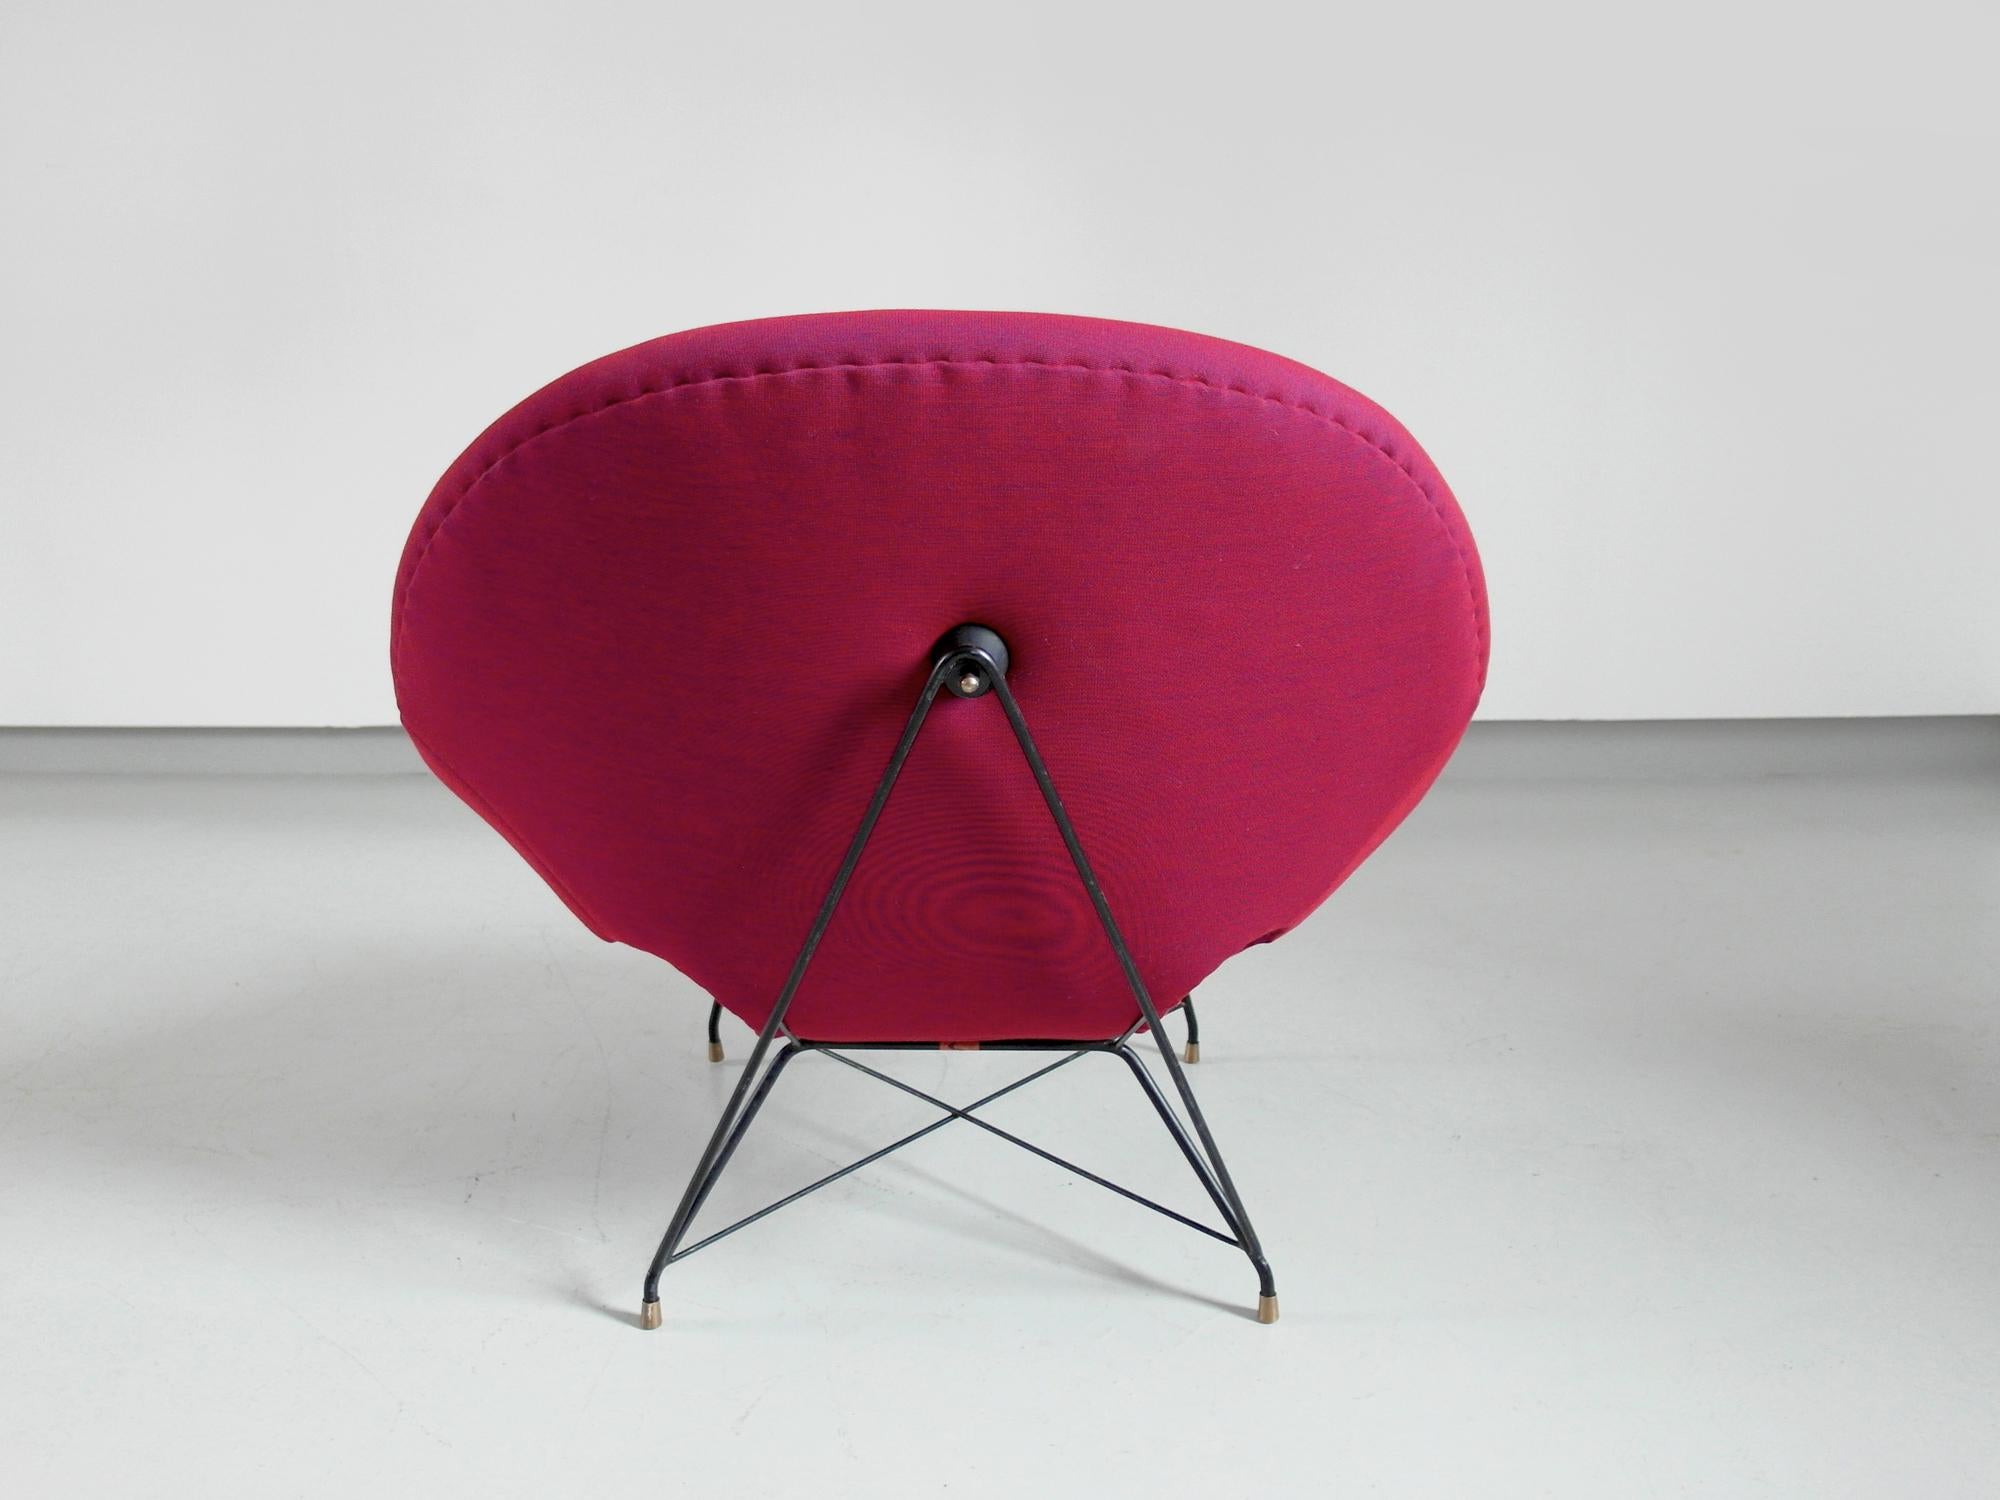 Pair of Cosmos Chairs in Ruby red/ Raspberry red by Augusto Bozzi for Saporiti For Sale 1